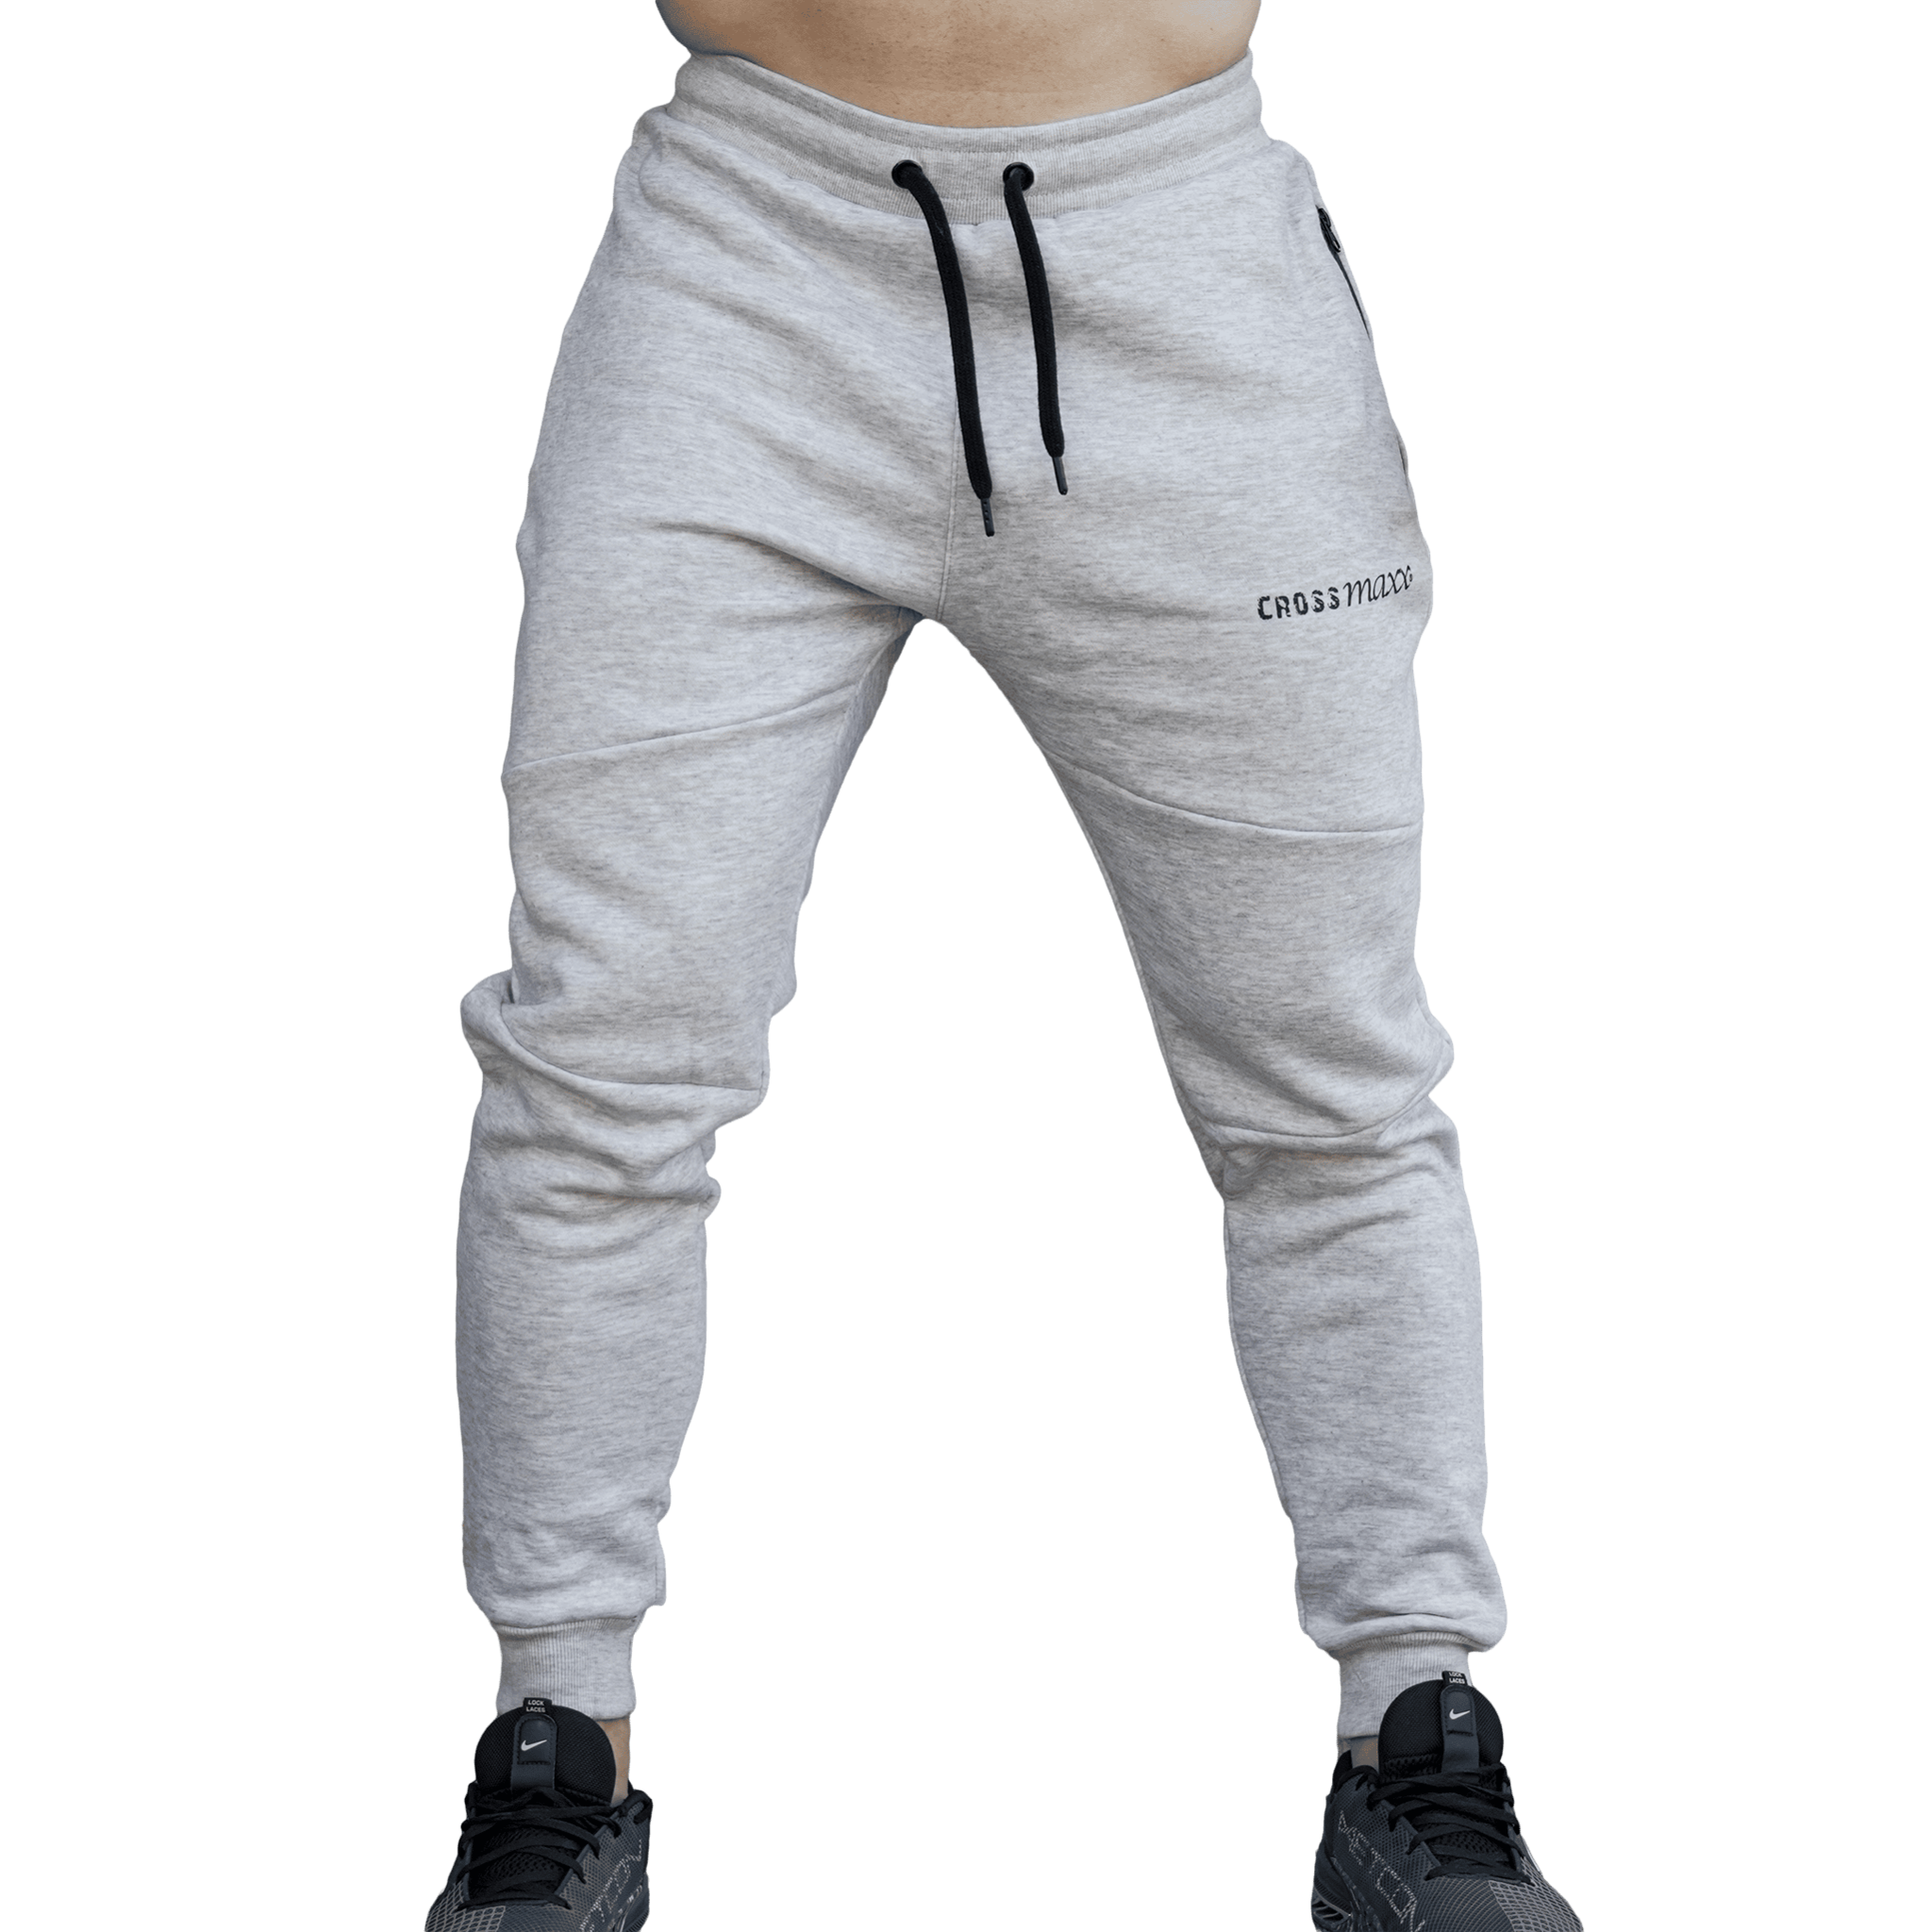 G4Free Men's Cotton Sweatpants Joggers Workout Running Casual Lounge  Athletic Pants with Pockets Yoga Pants (Light Grey Heather, L)